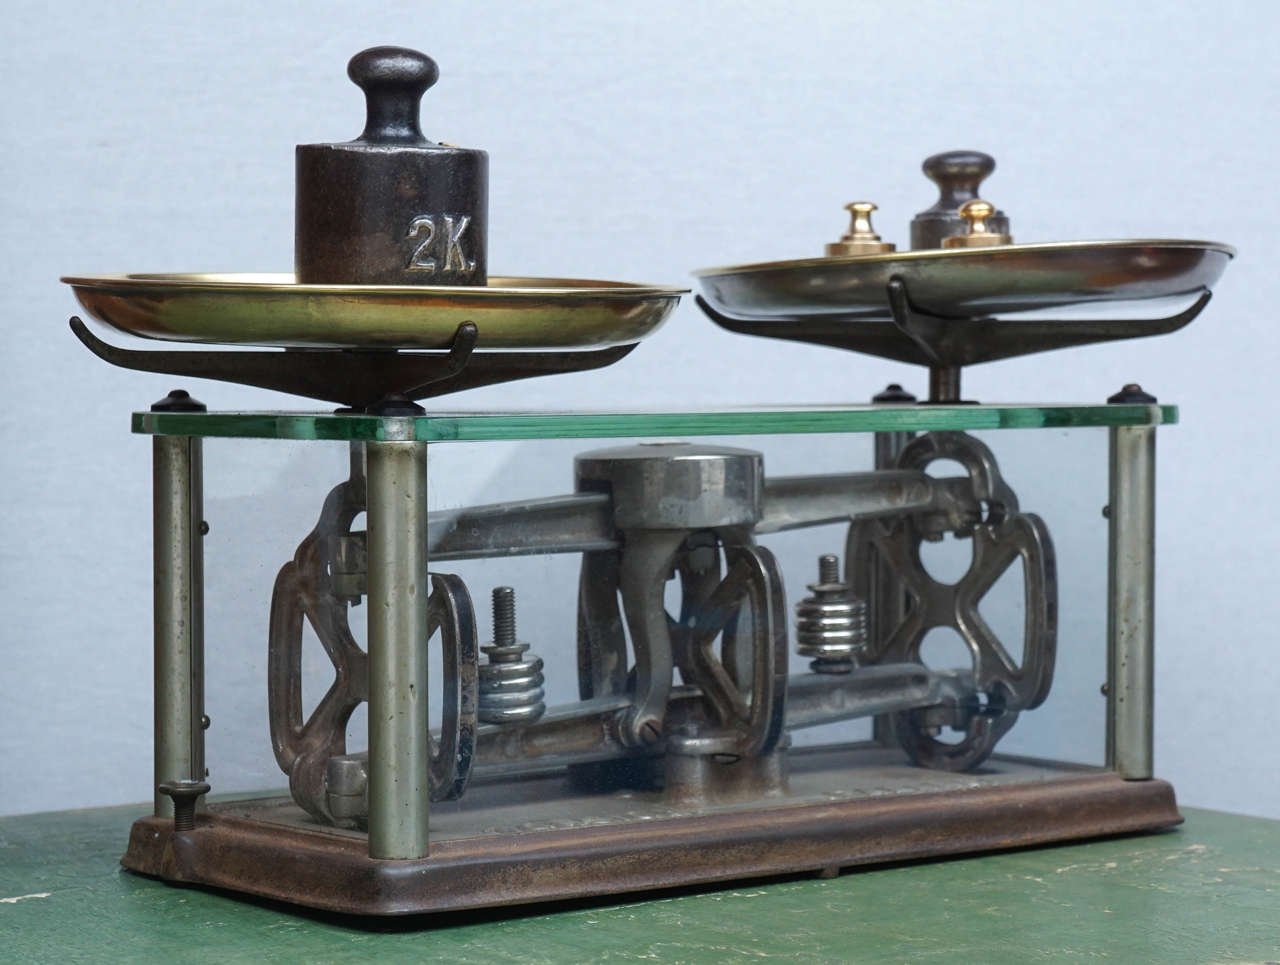 We are loaded with antique scales at Painted Porch and here is our most unique scale. It is in glass and American with a metal label from 1882. This was used as a pharmacy scale. We have at least 12 scales at Painted Porch and they work and almost